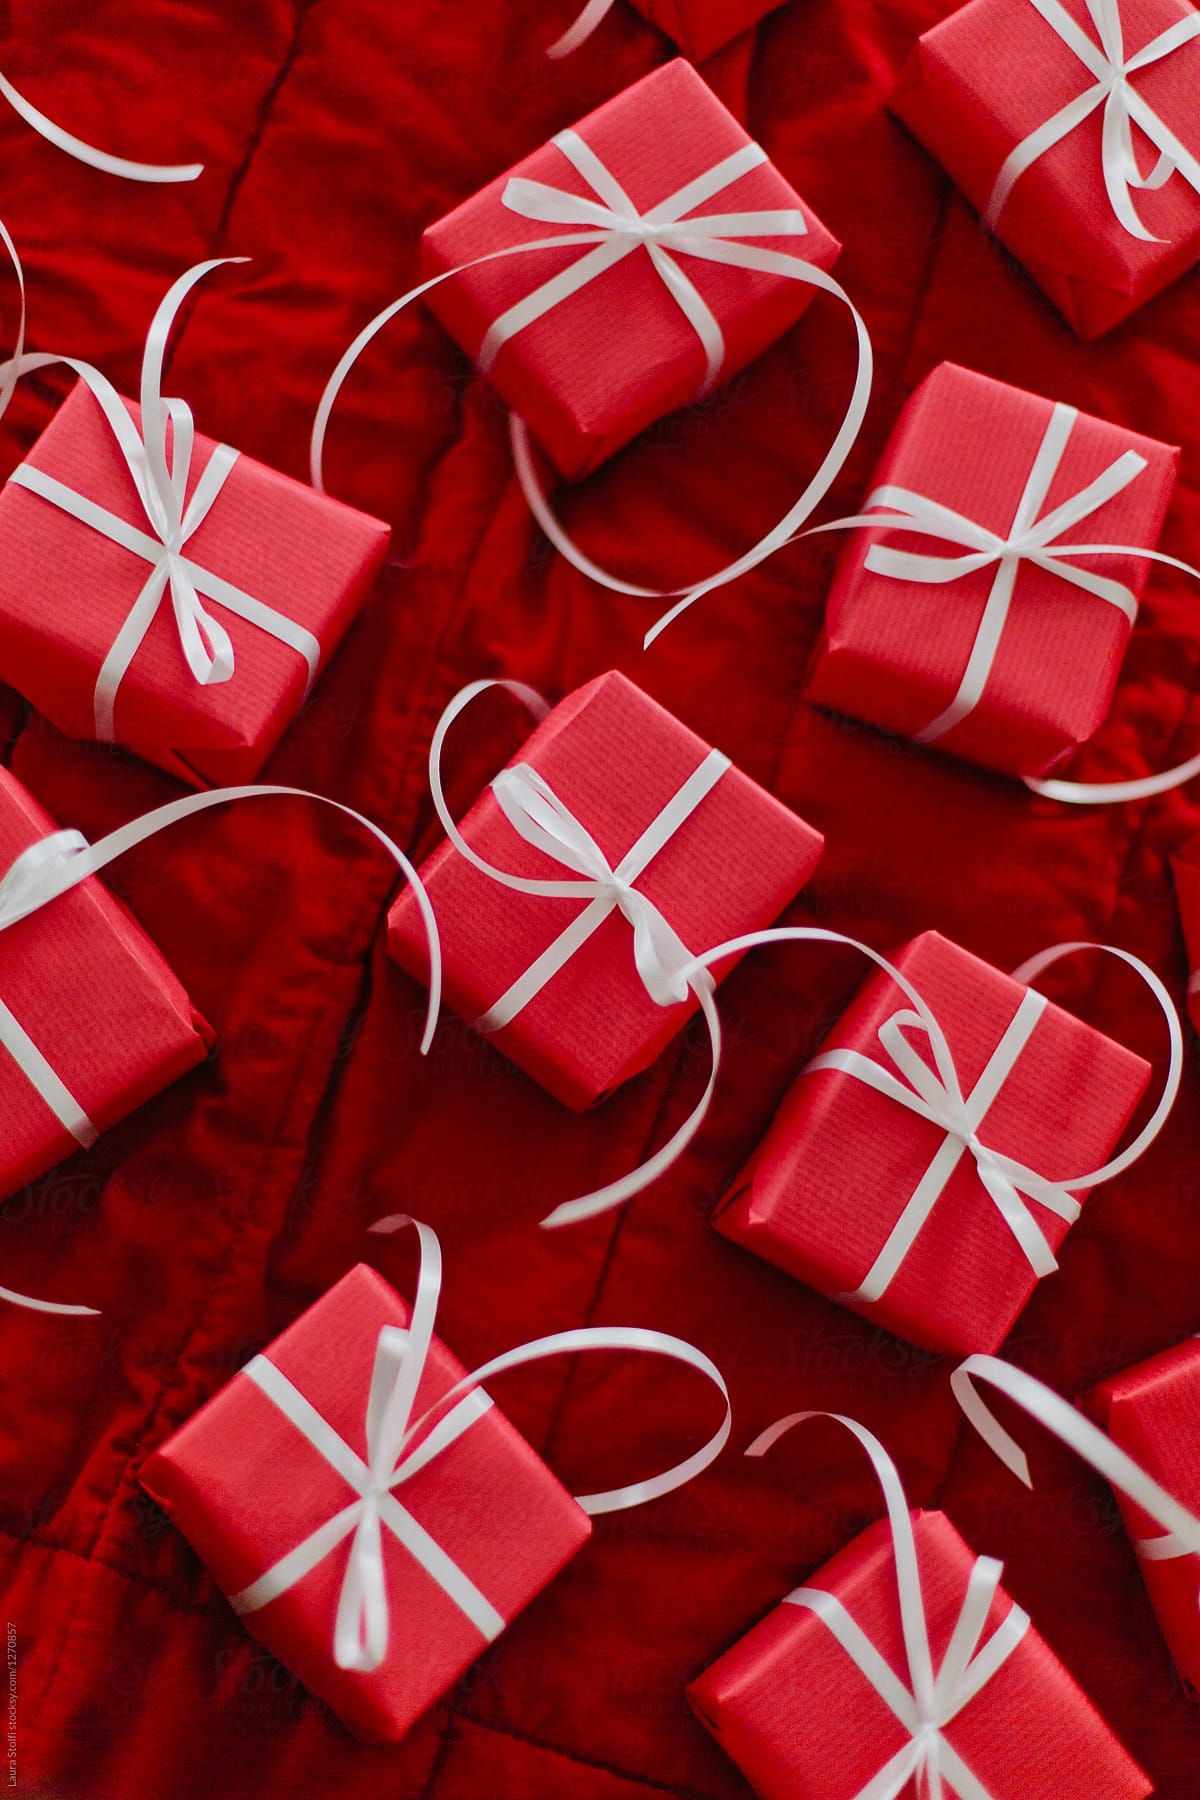 Many gifts in red boxes on bed